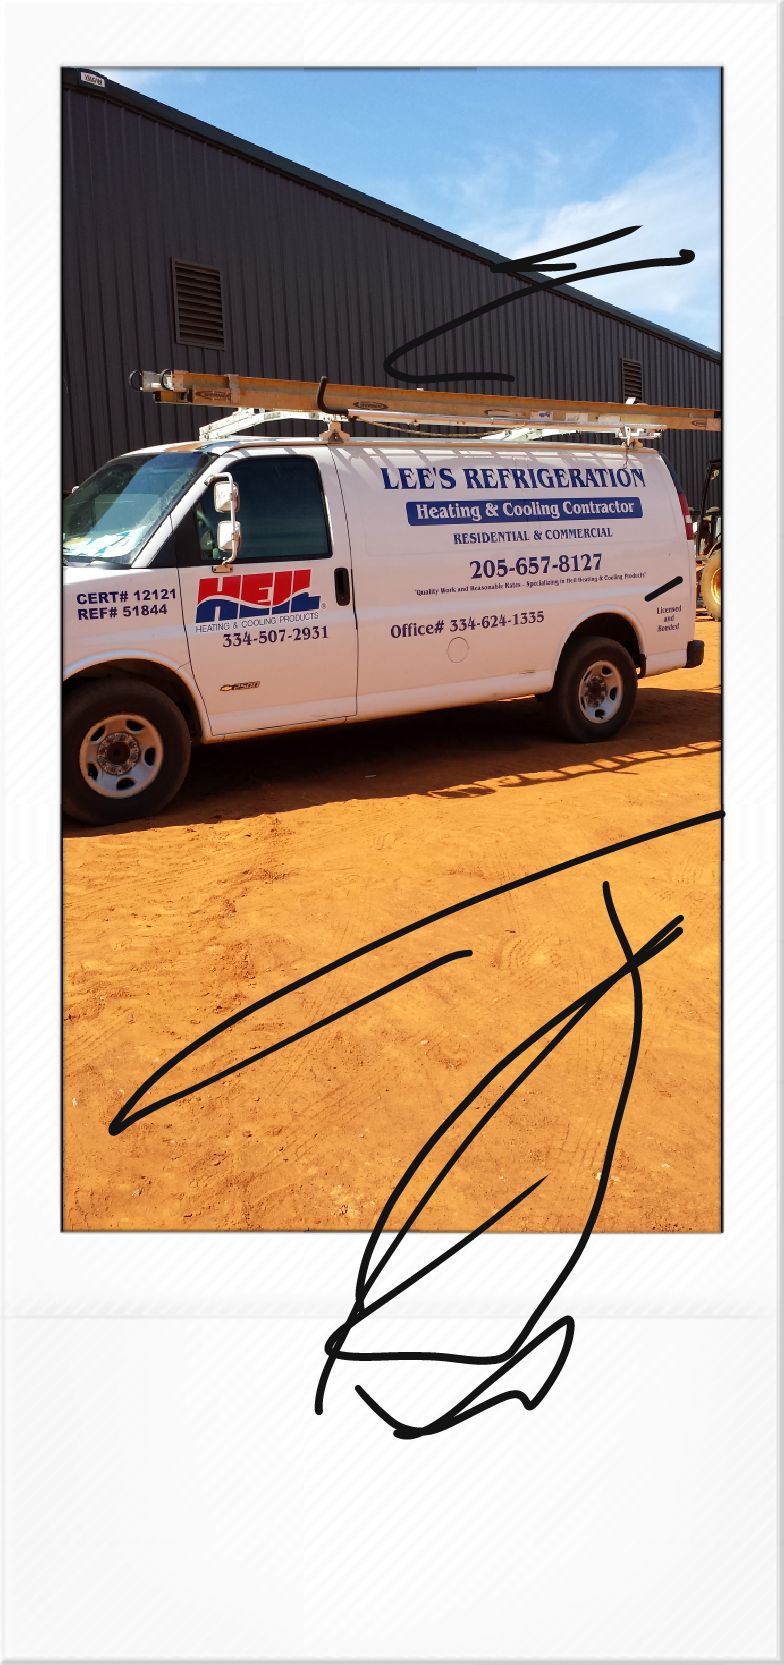 Lee's Refrigeration, Heating and Cooling LLC